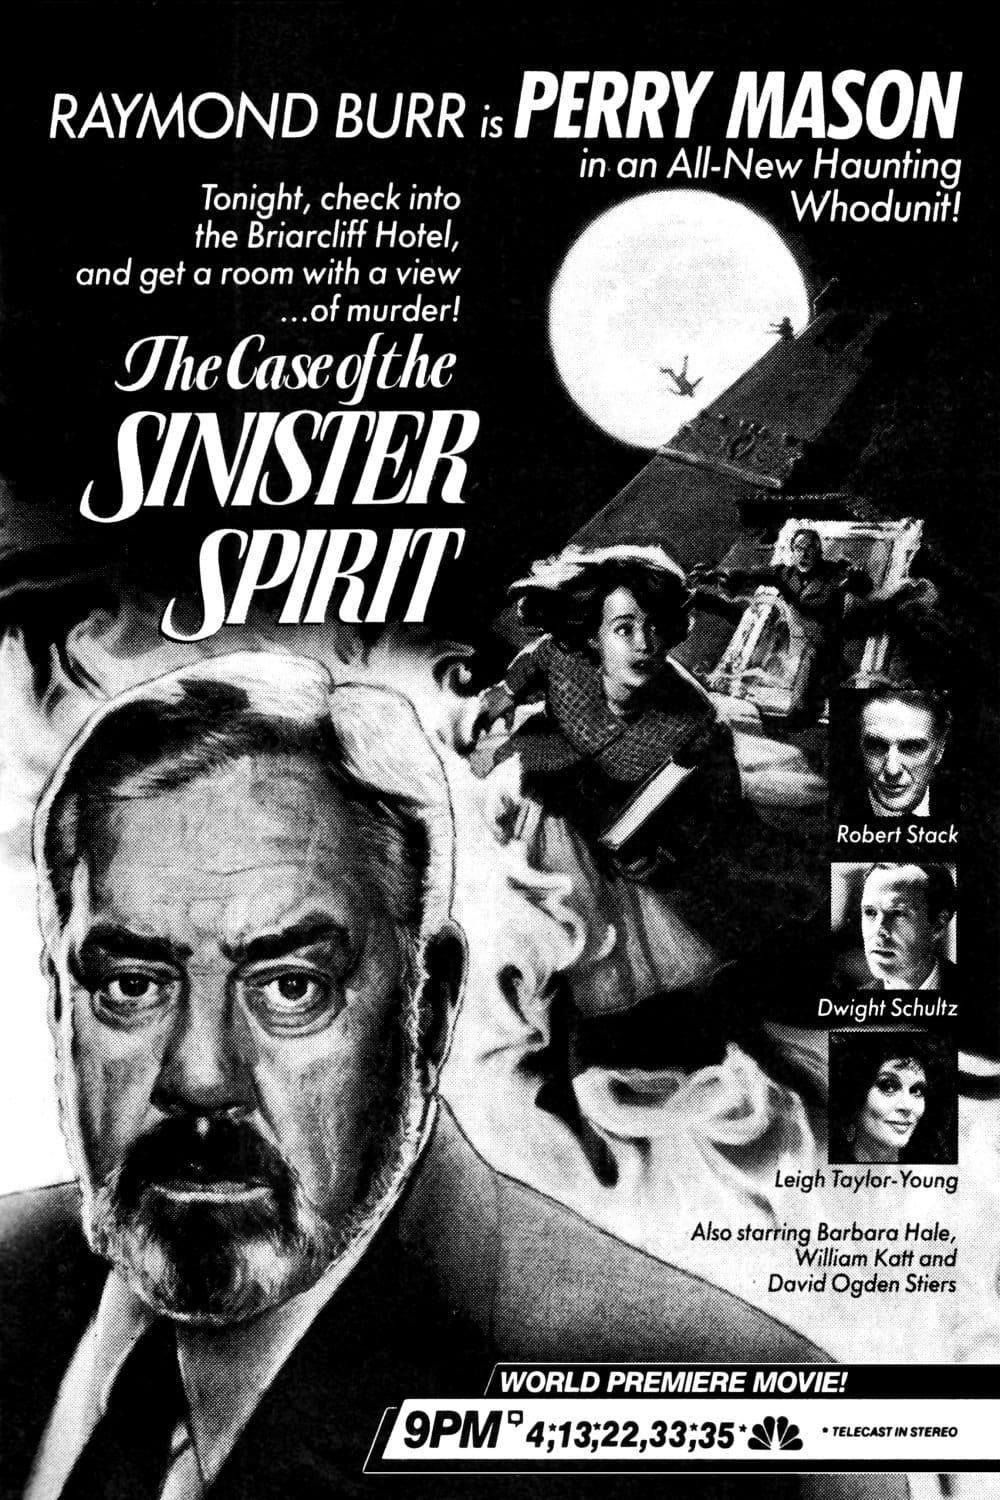 Perry Mason: The Case of the Sinister Spirit poster